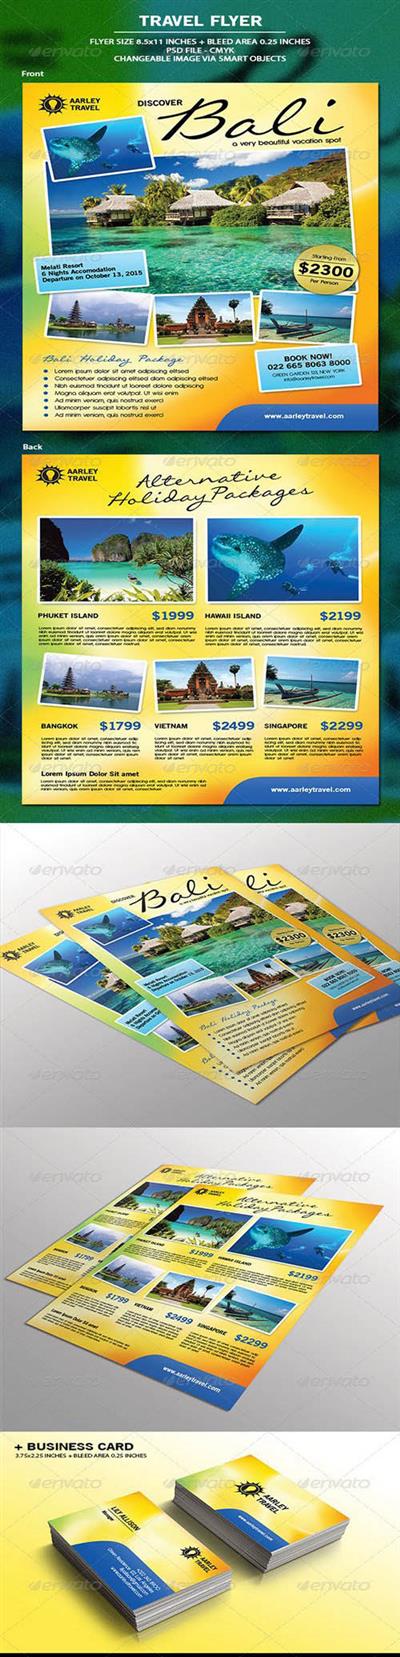 Graphicriver - Travel Flyer + Business Card 6867642